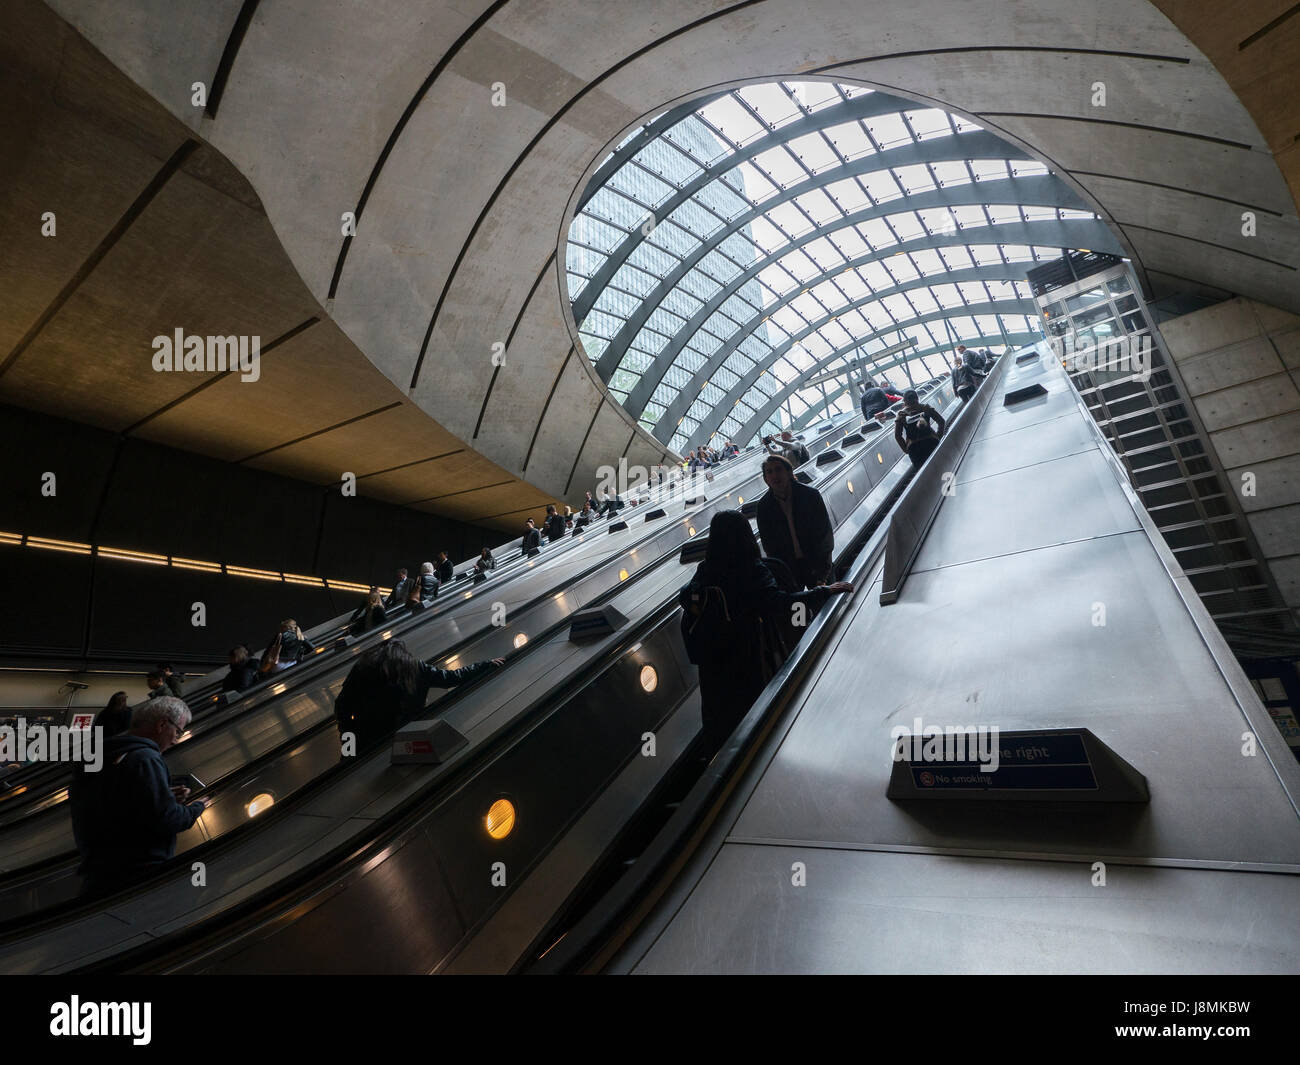 Canary Wharf station in the London Underground transit station. The station serves The Docklands financial district. Stock Photo